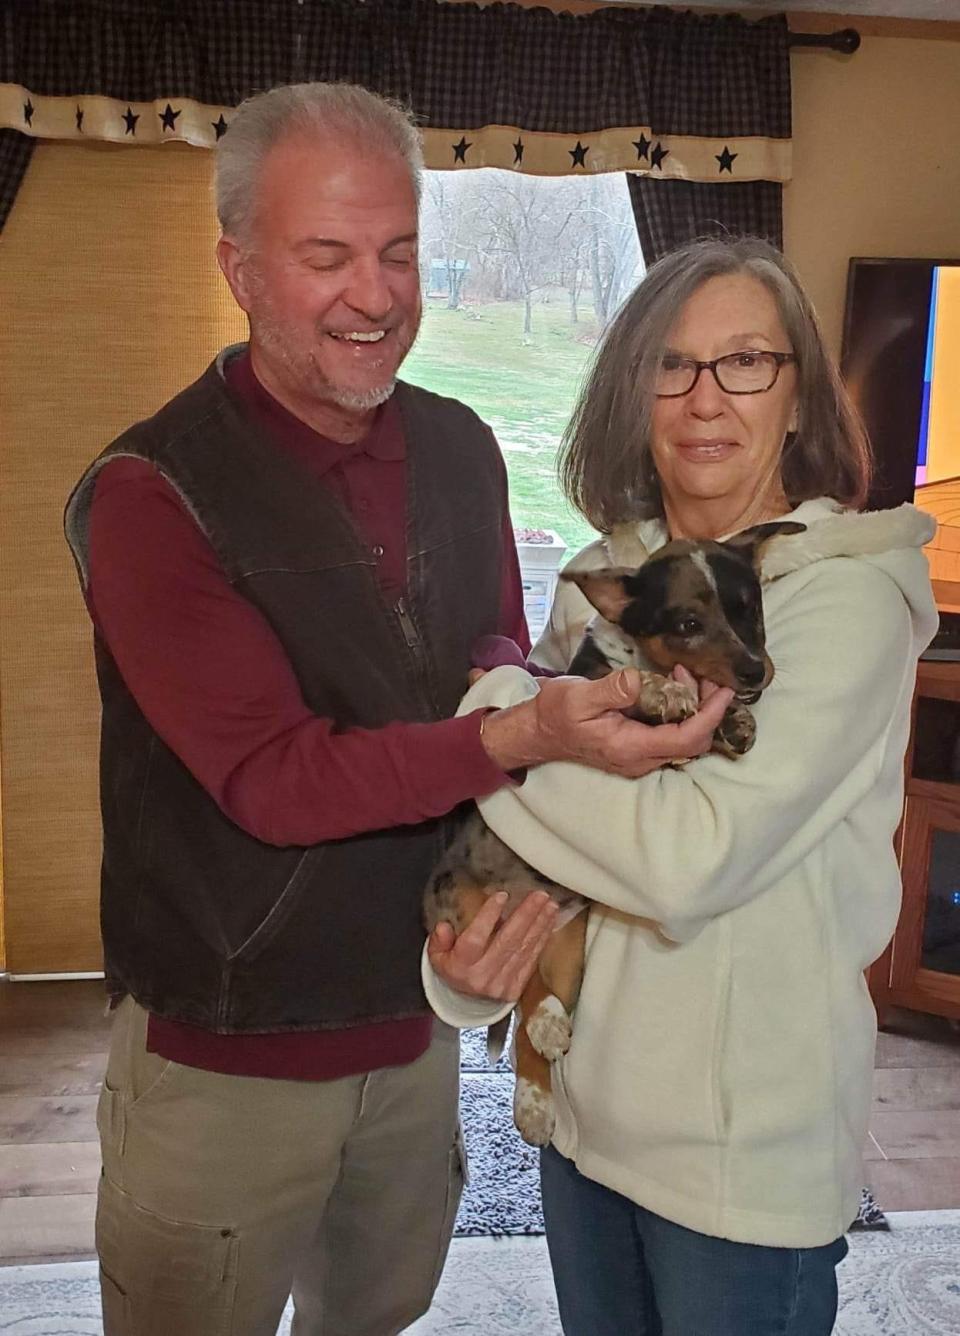 Rick and Cherry Martin drove from Maine to Chillicothe this spring to adopt their new puppy, Paint.